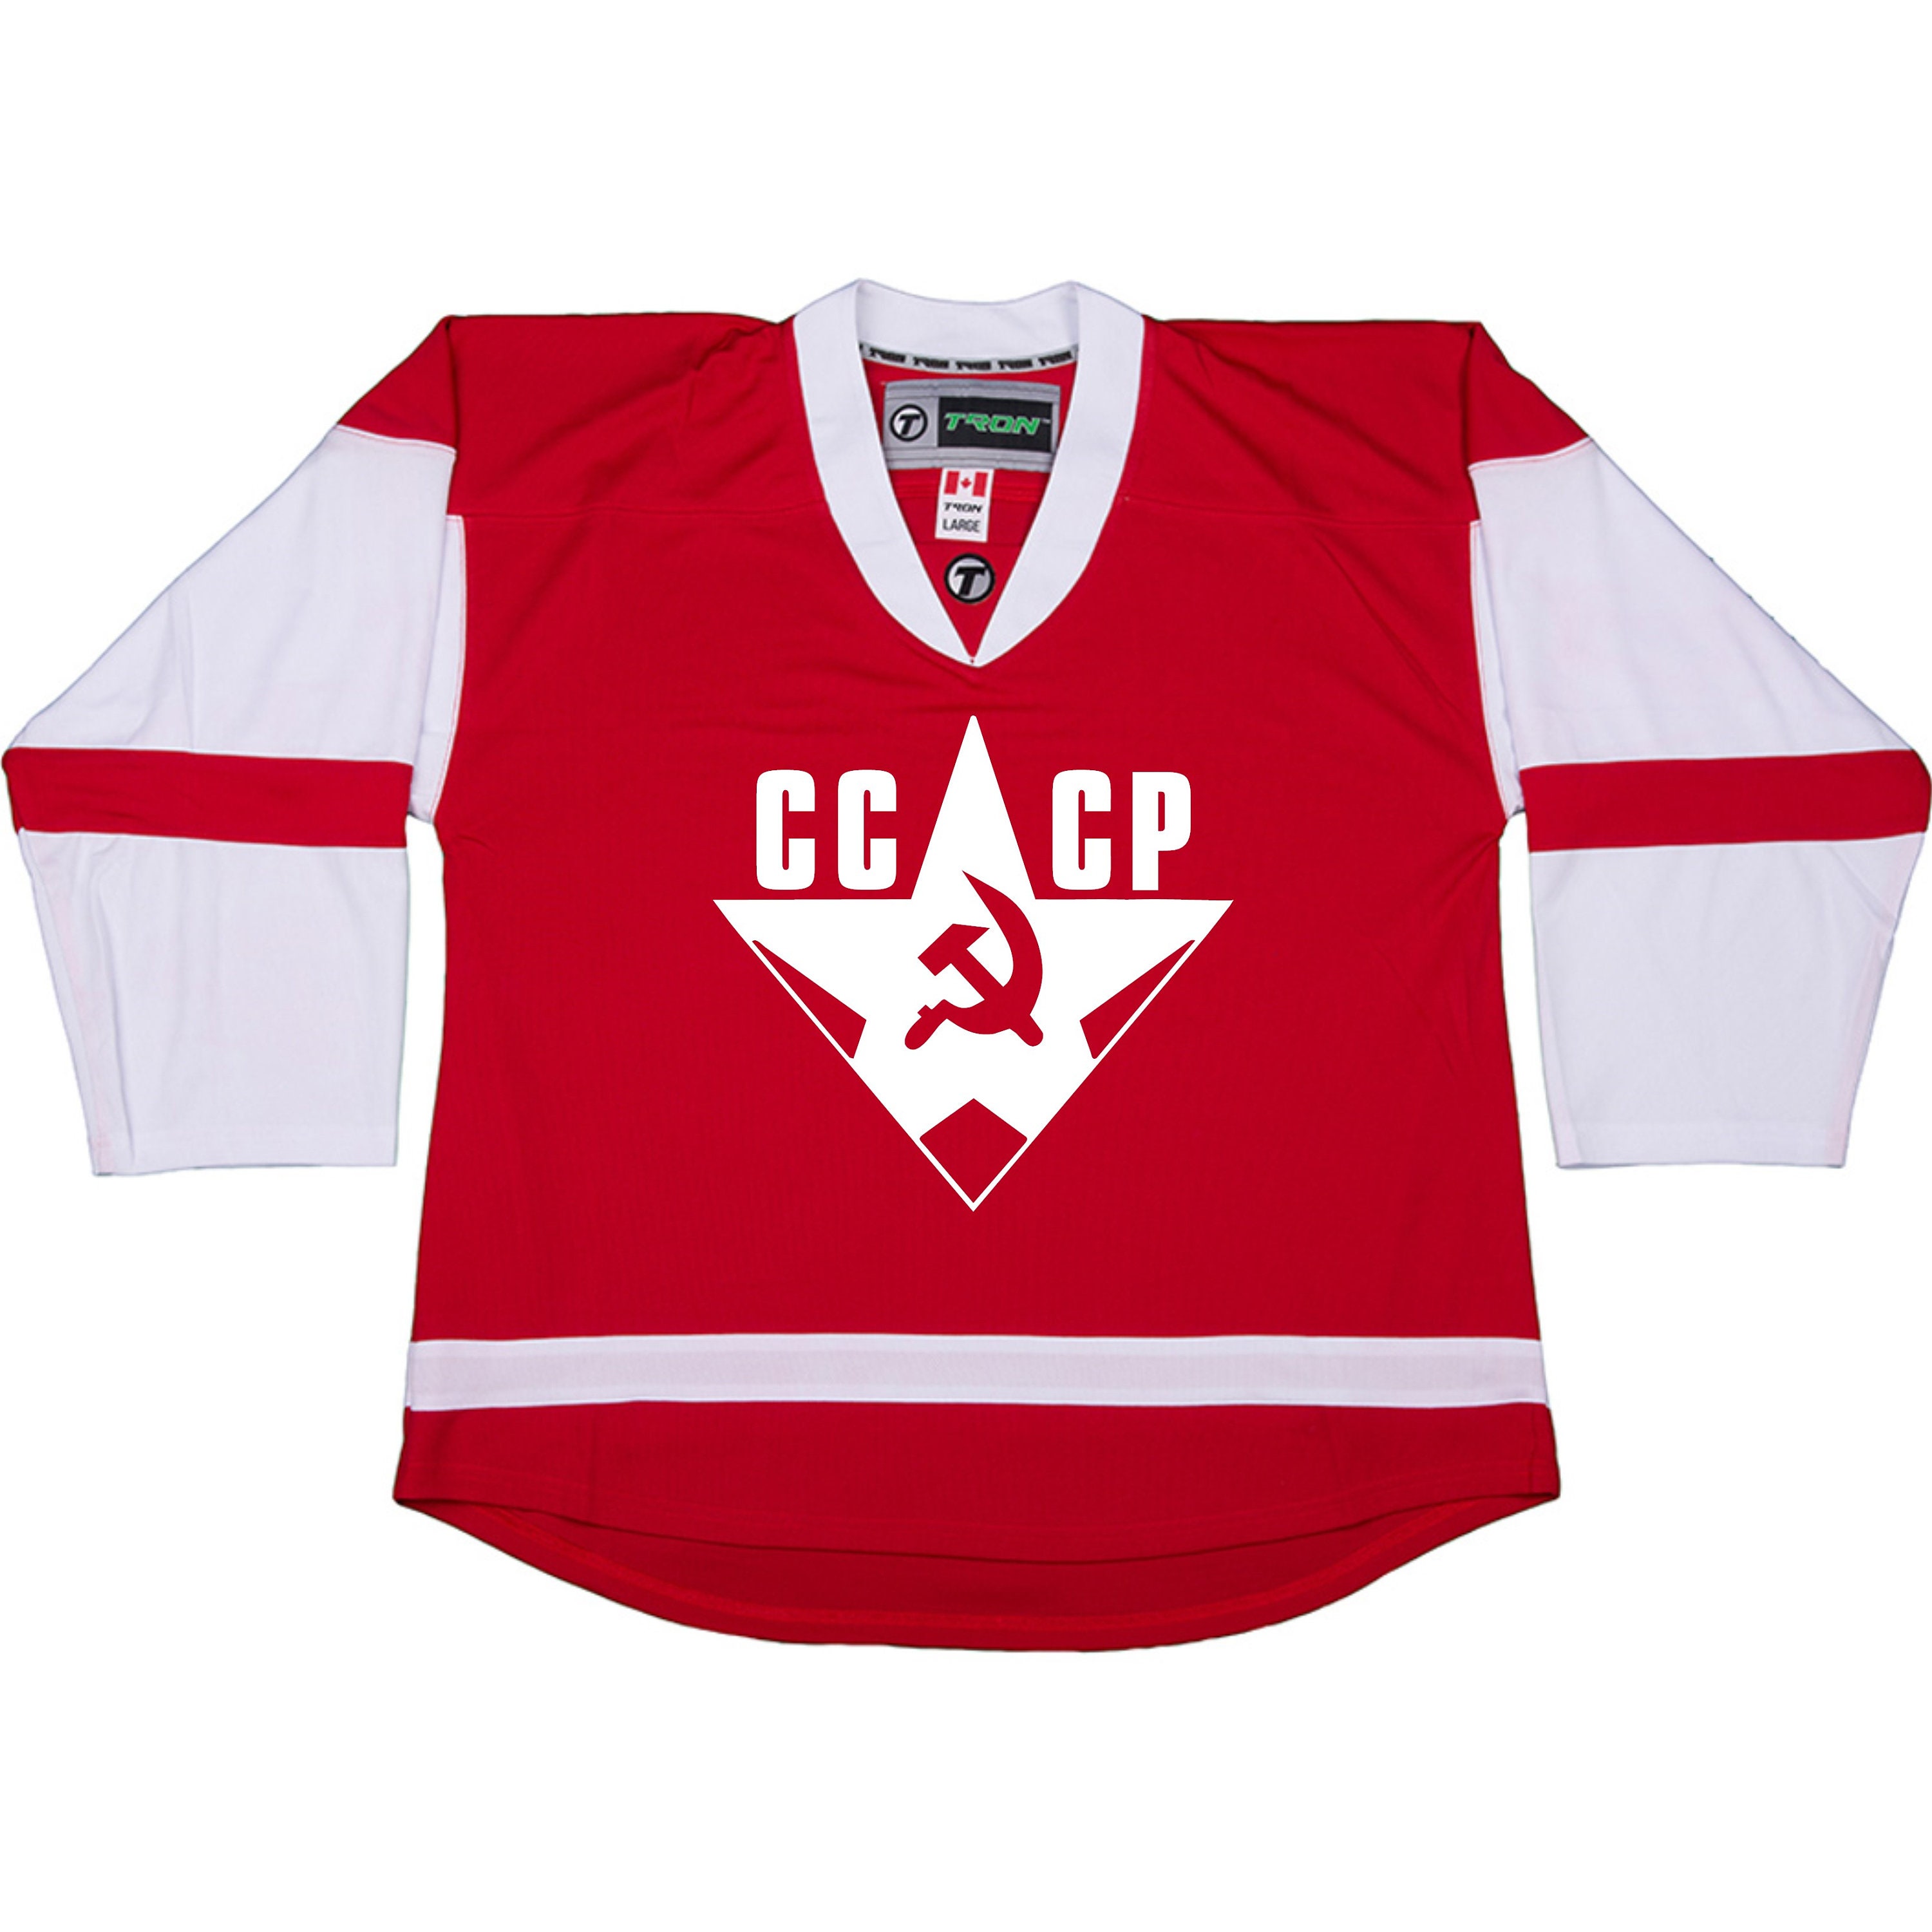 1972 USSR Olympic Hockey Team Jersey. Hockey Collectibles